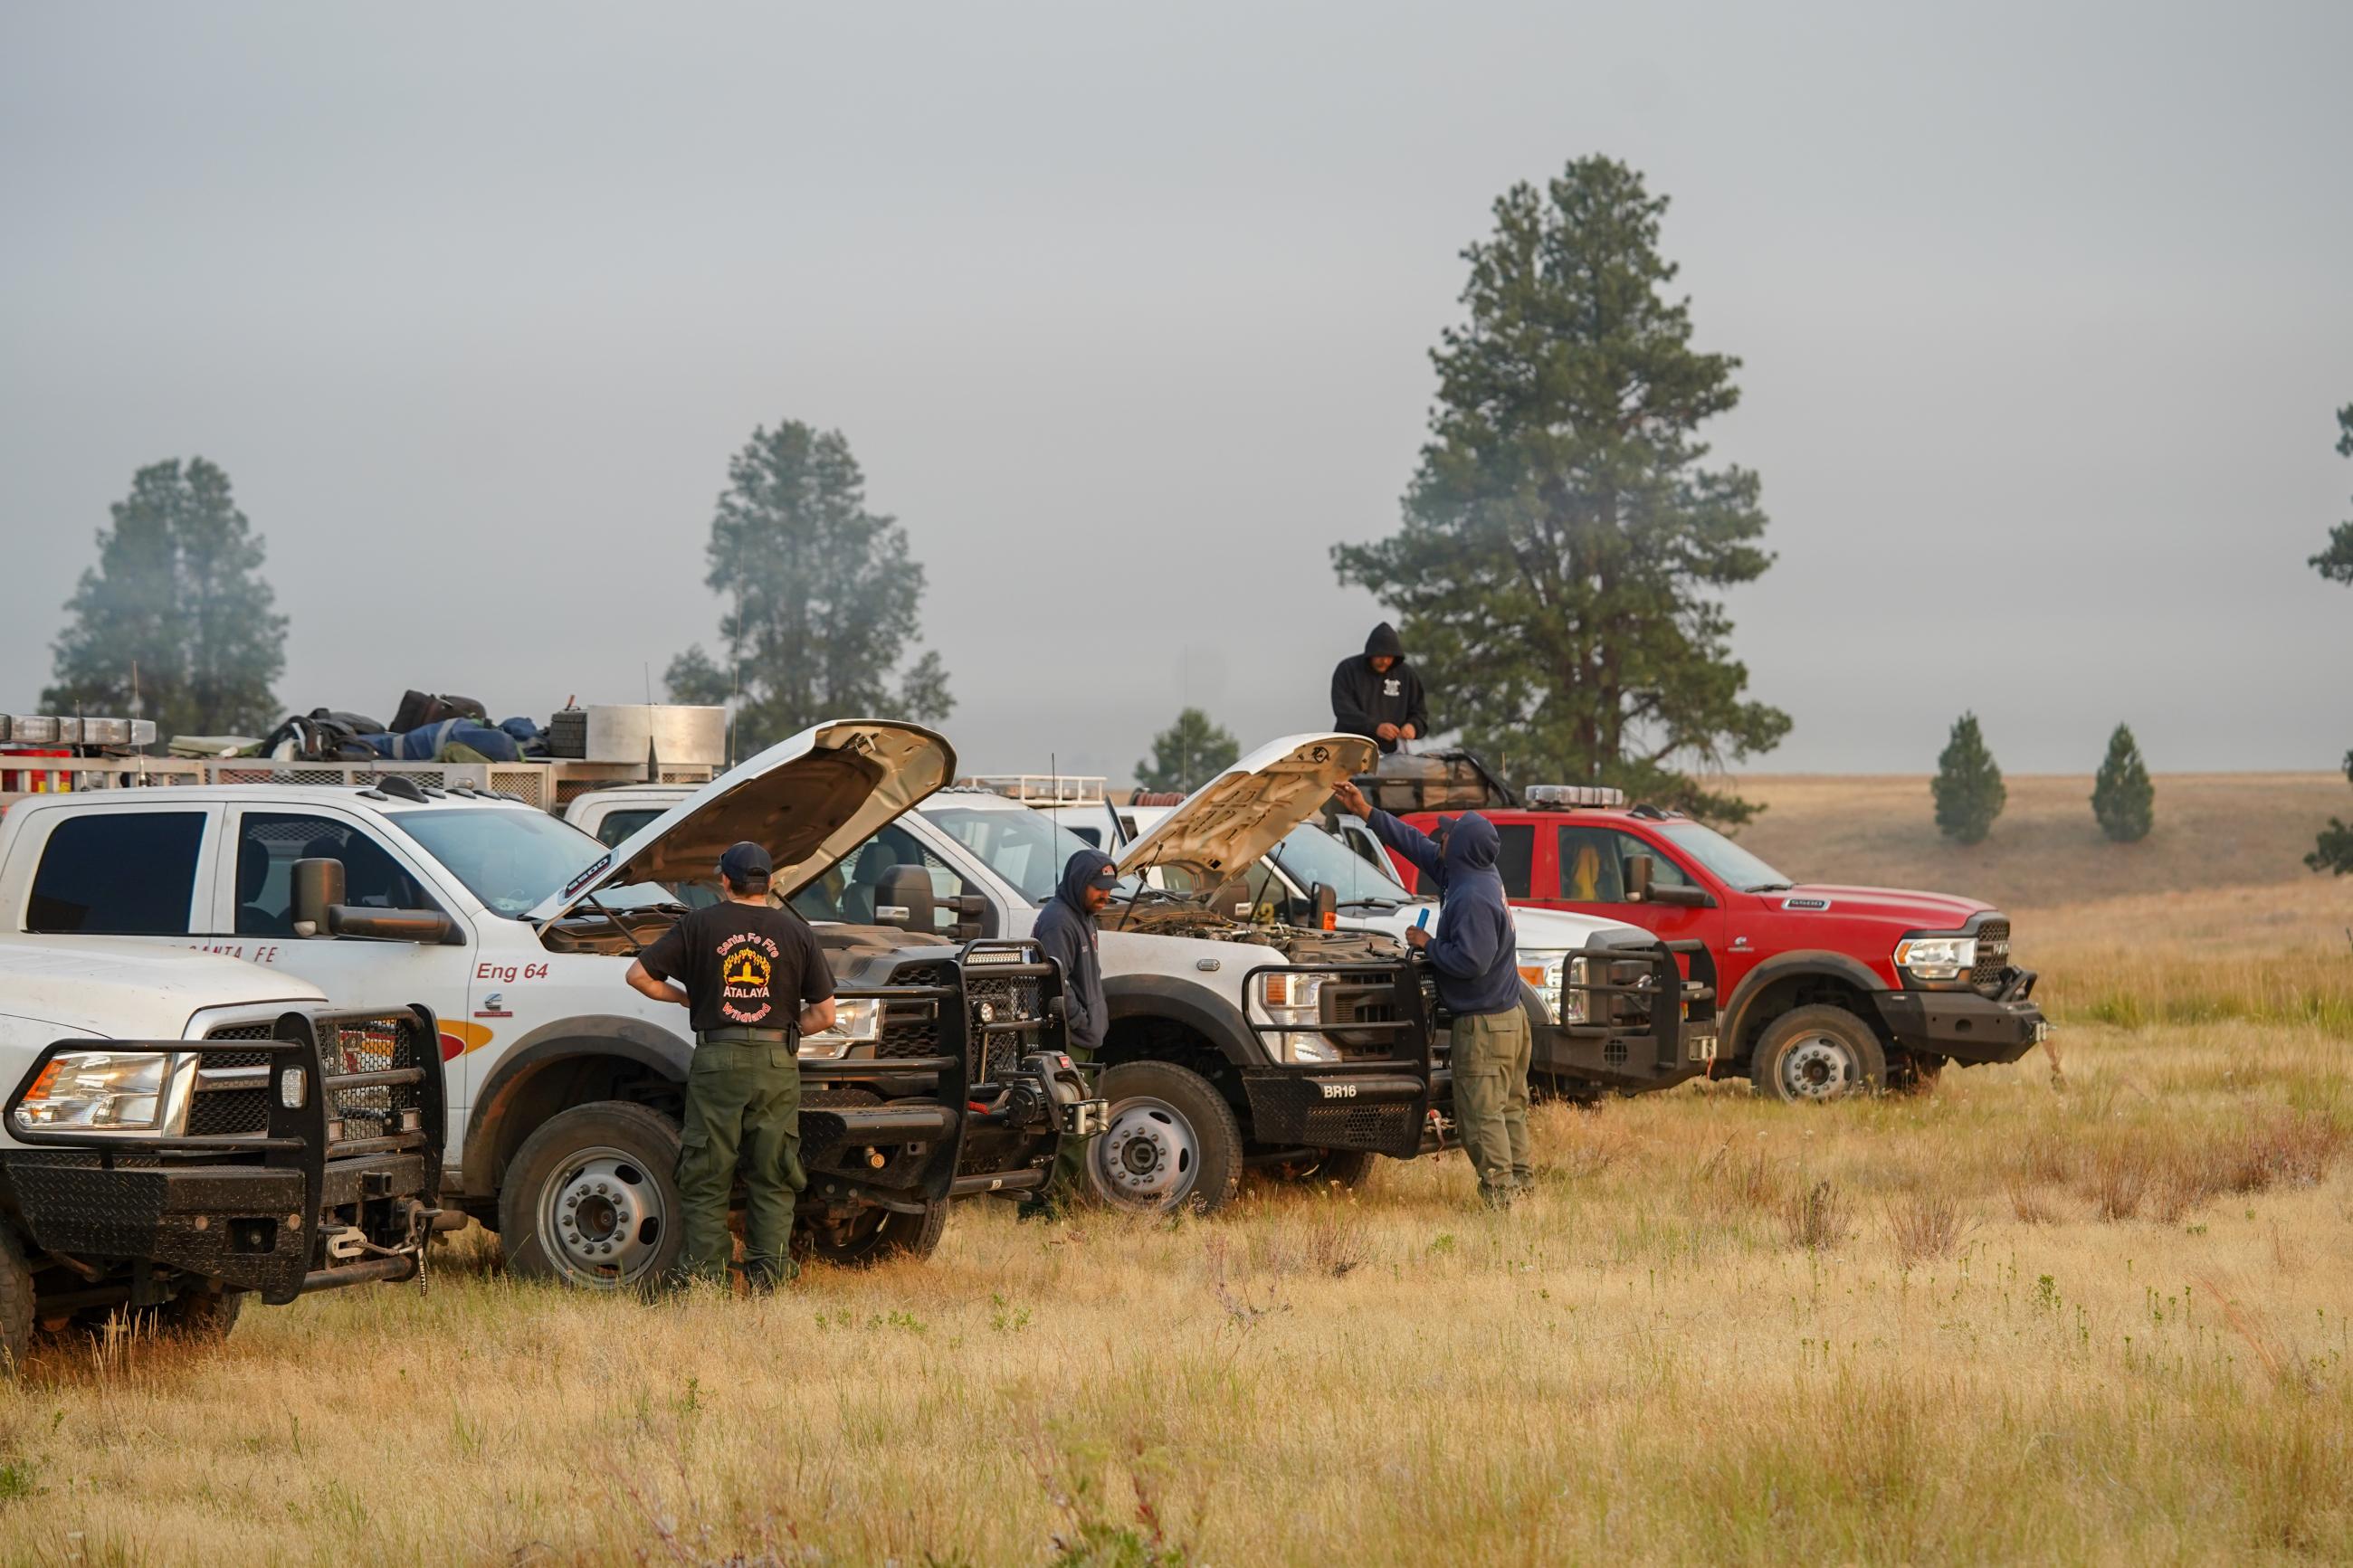 Image of wildland fire engines staging in a grassy field. 